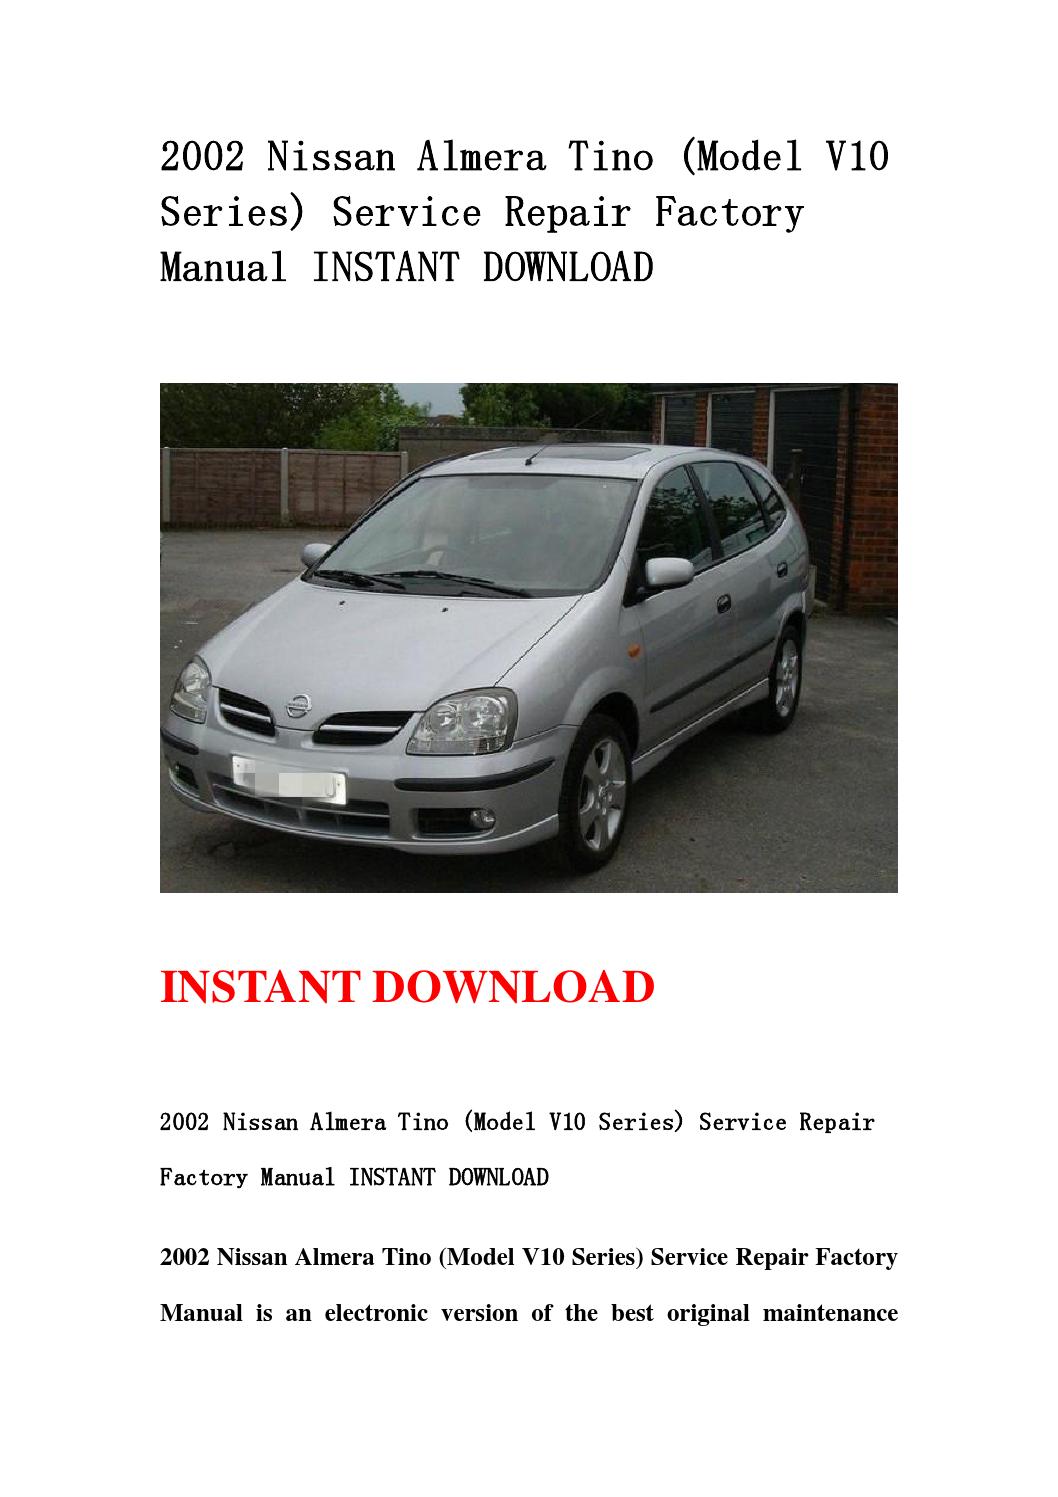 Nissan almera owners manual download